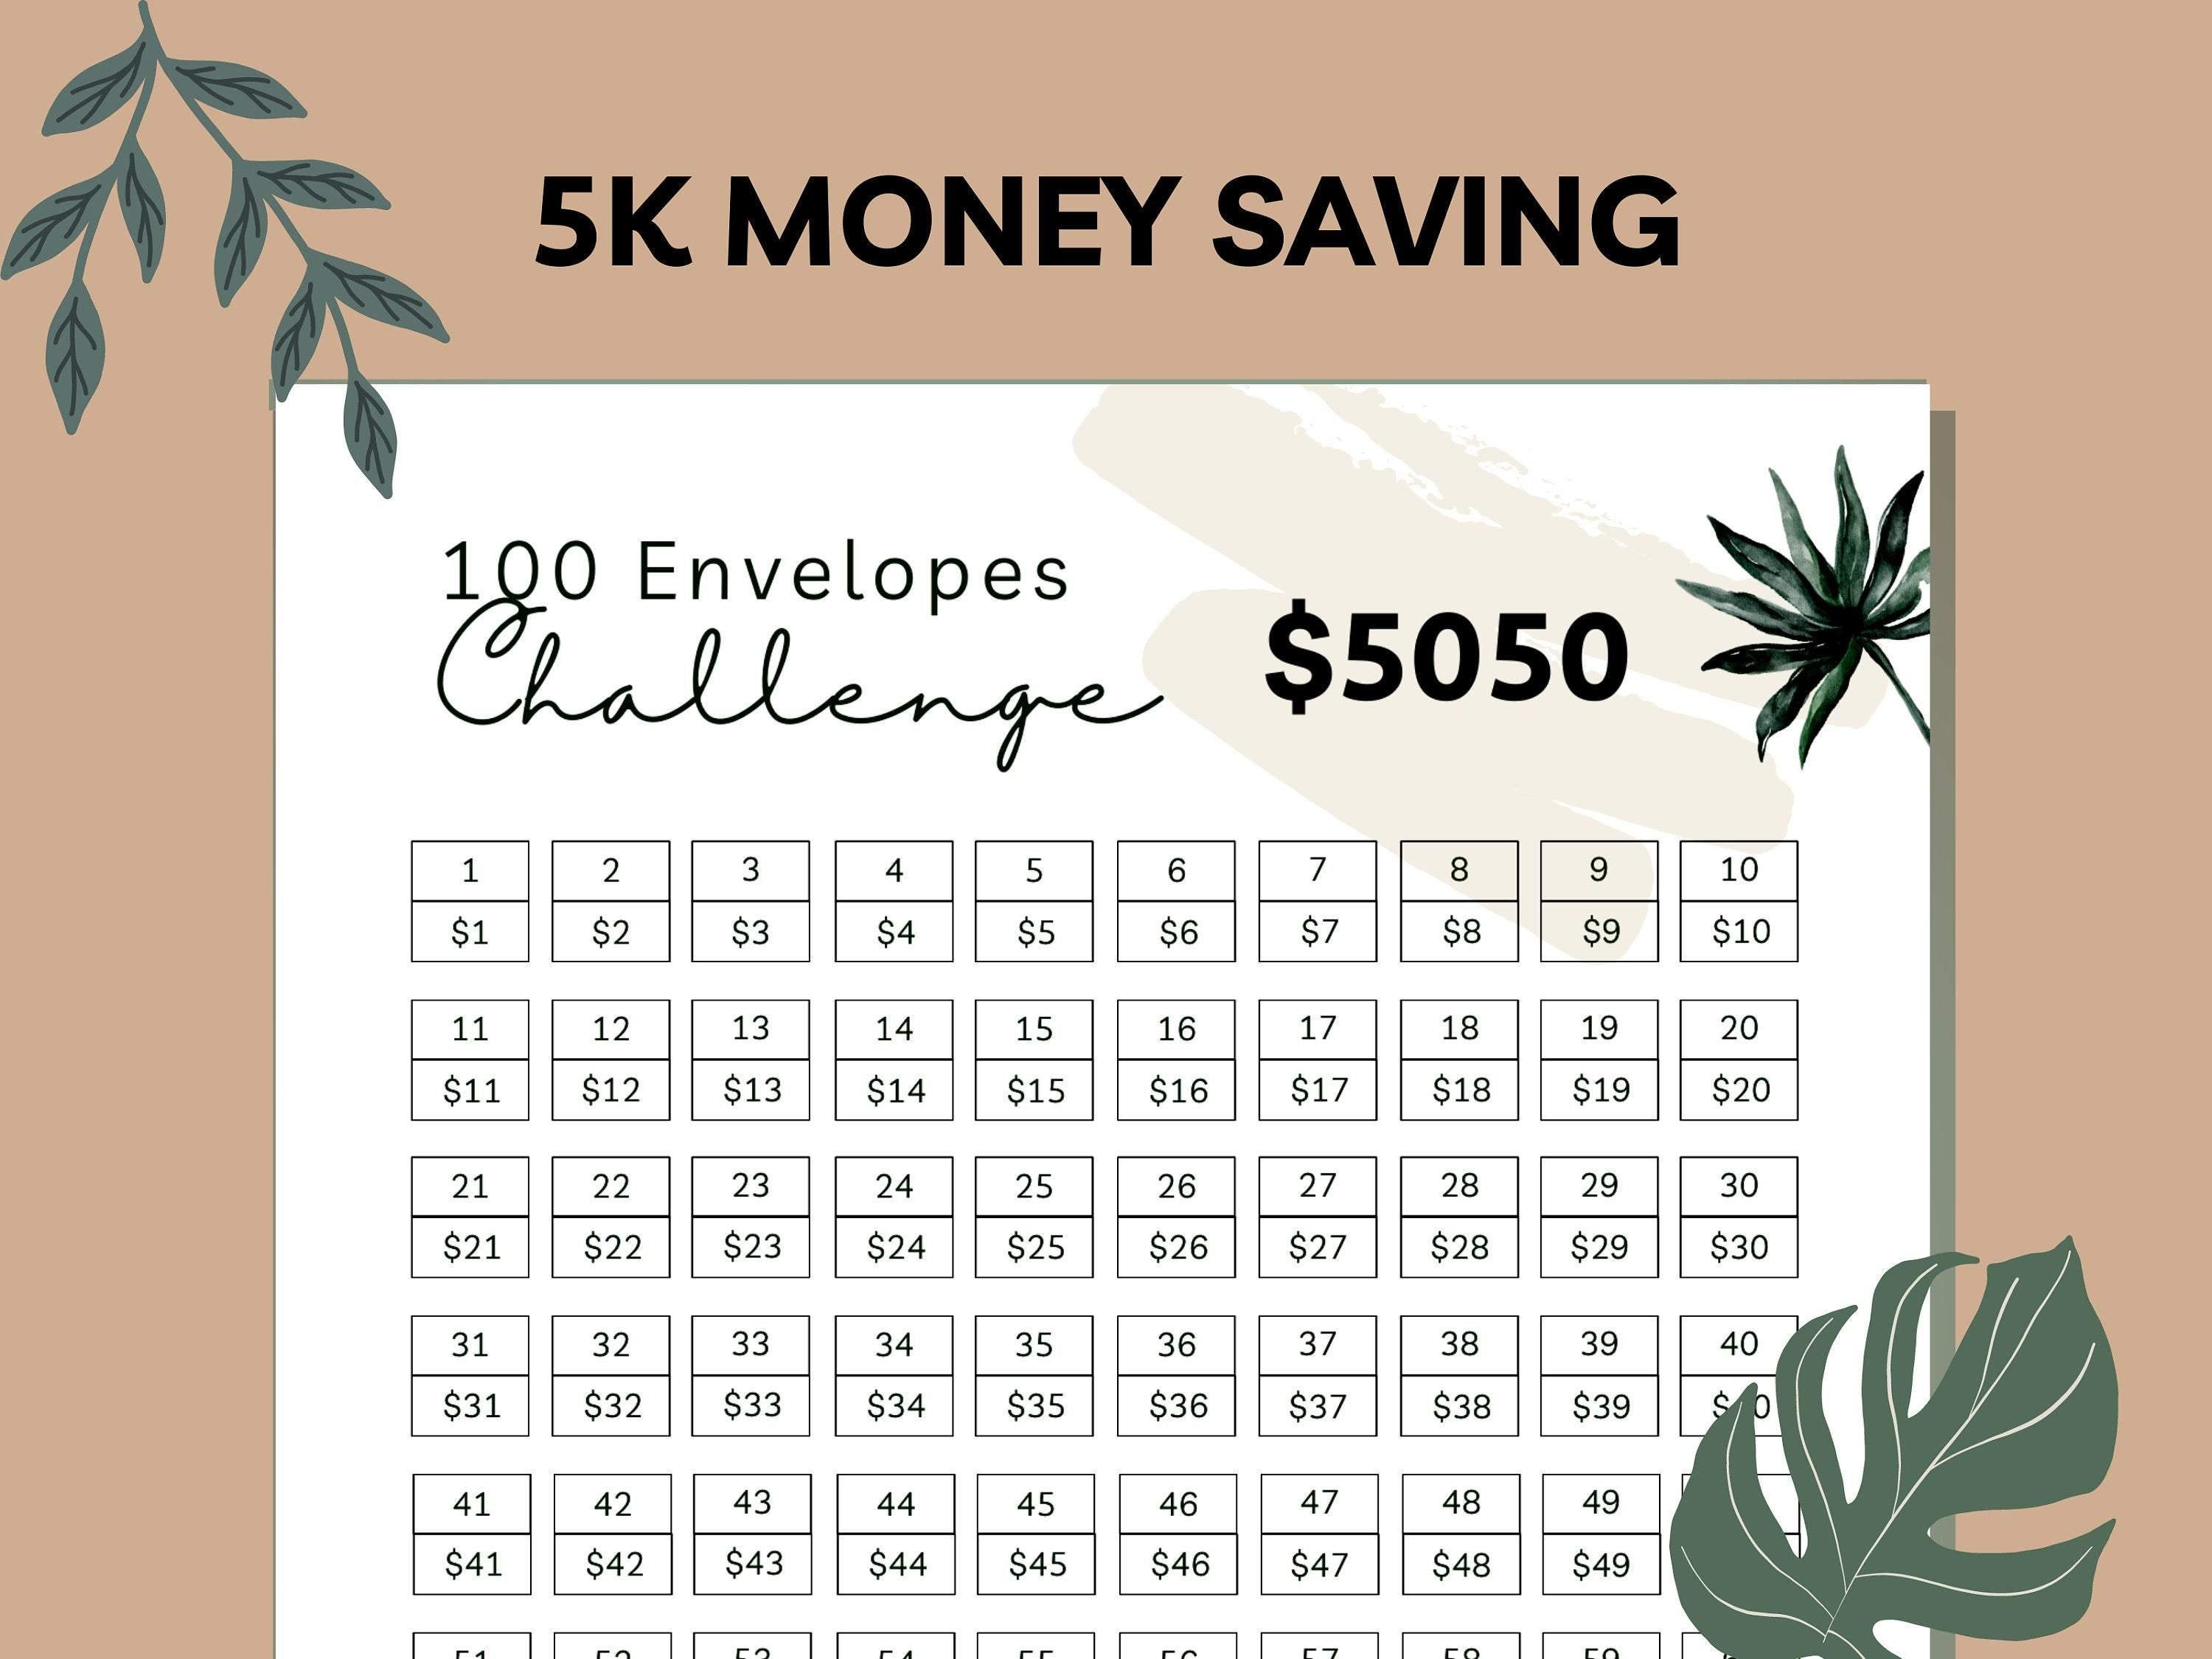 How Much Do You Save With The Envelope Challenge